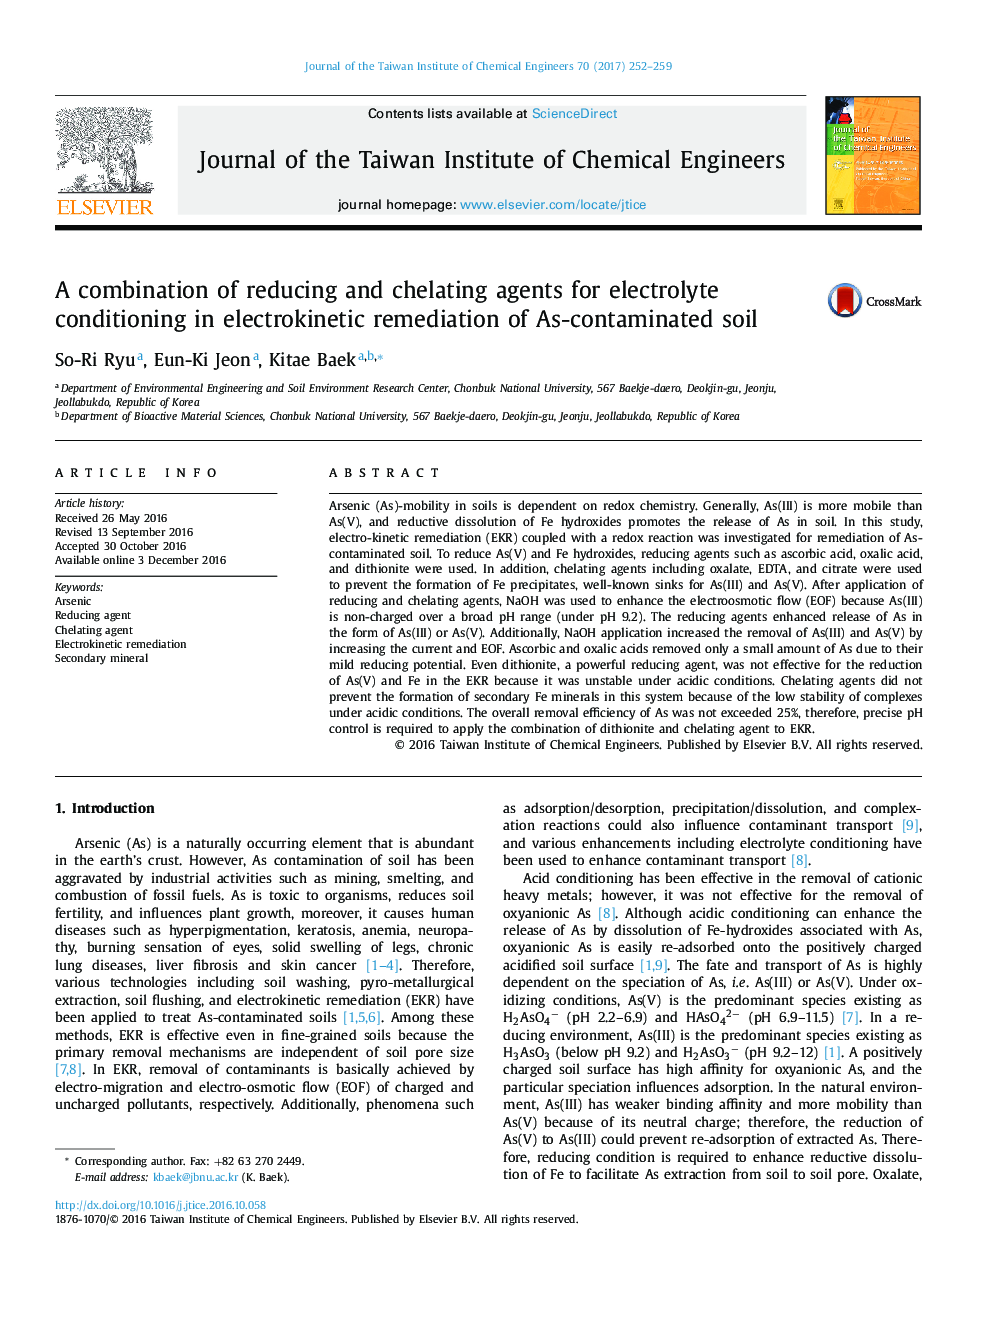 A combination of reducing and chelating agents for electrolyte conditioning in electrokinetic remediation of As-contaminated soil